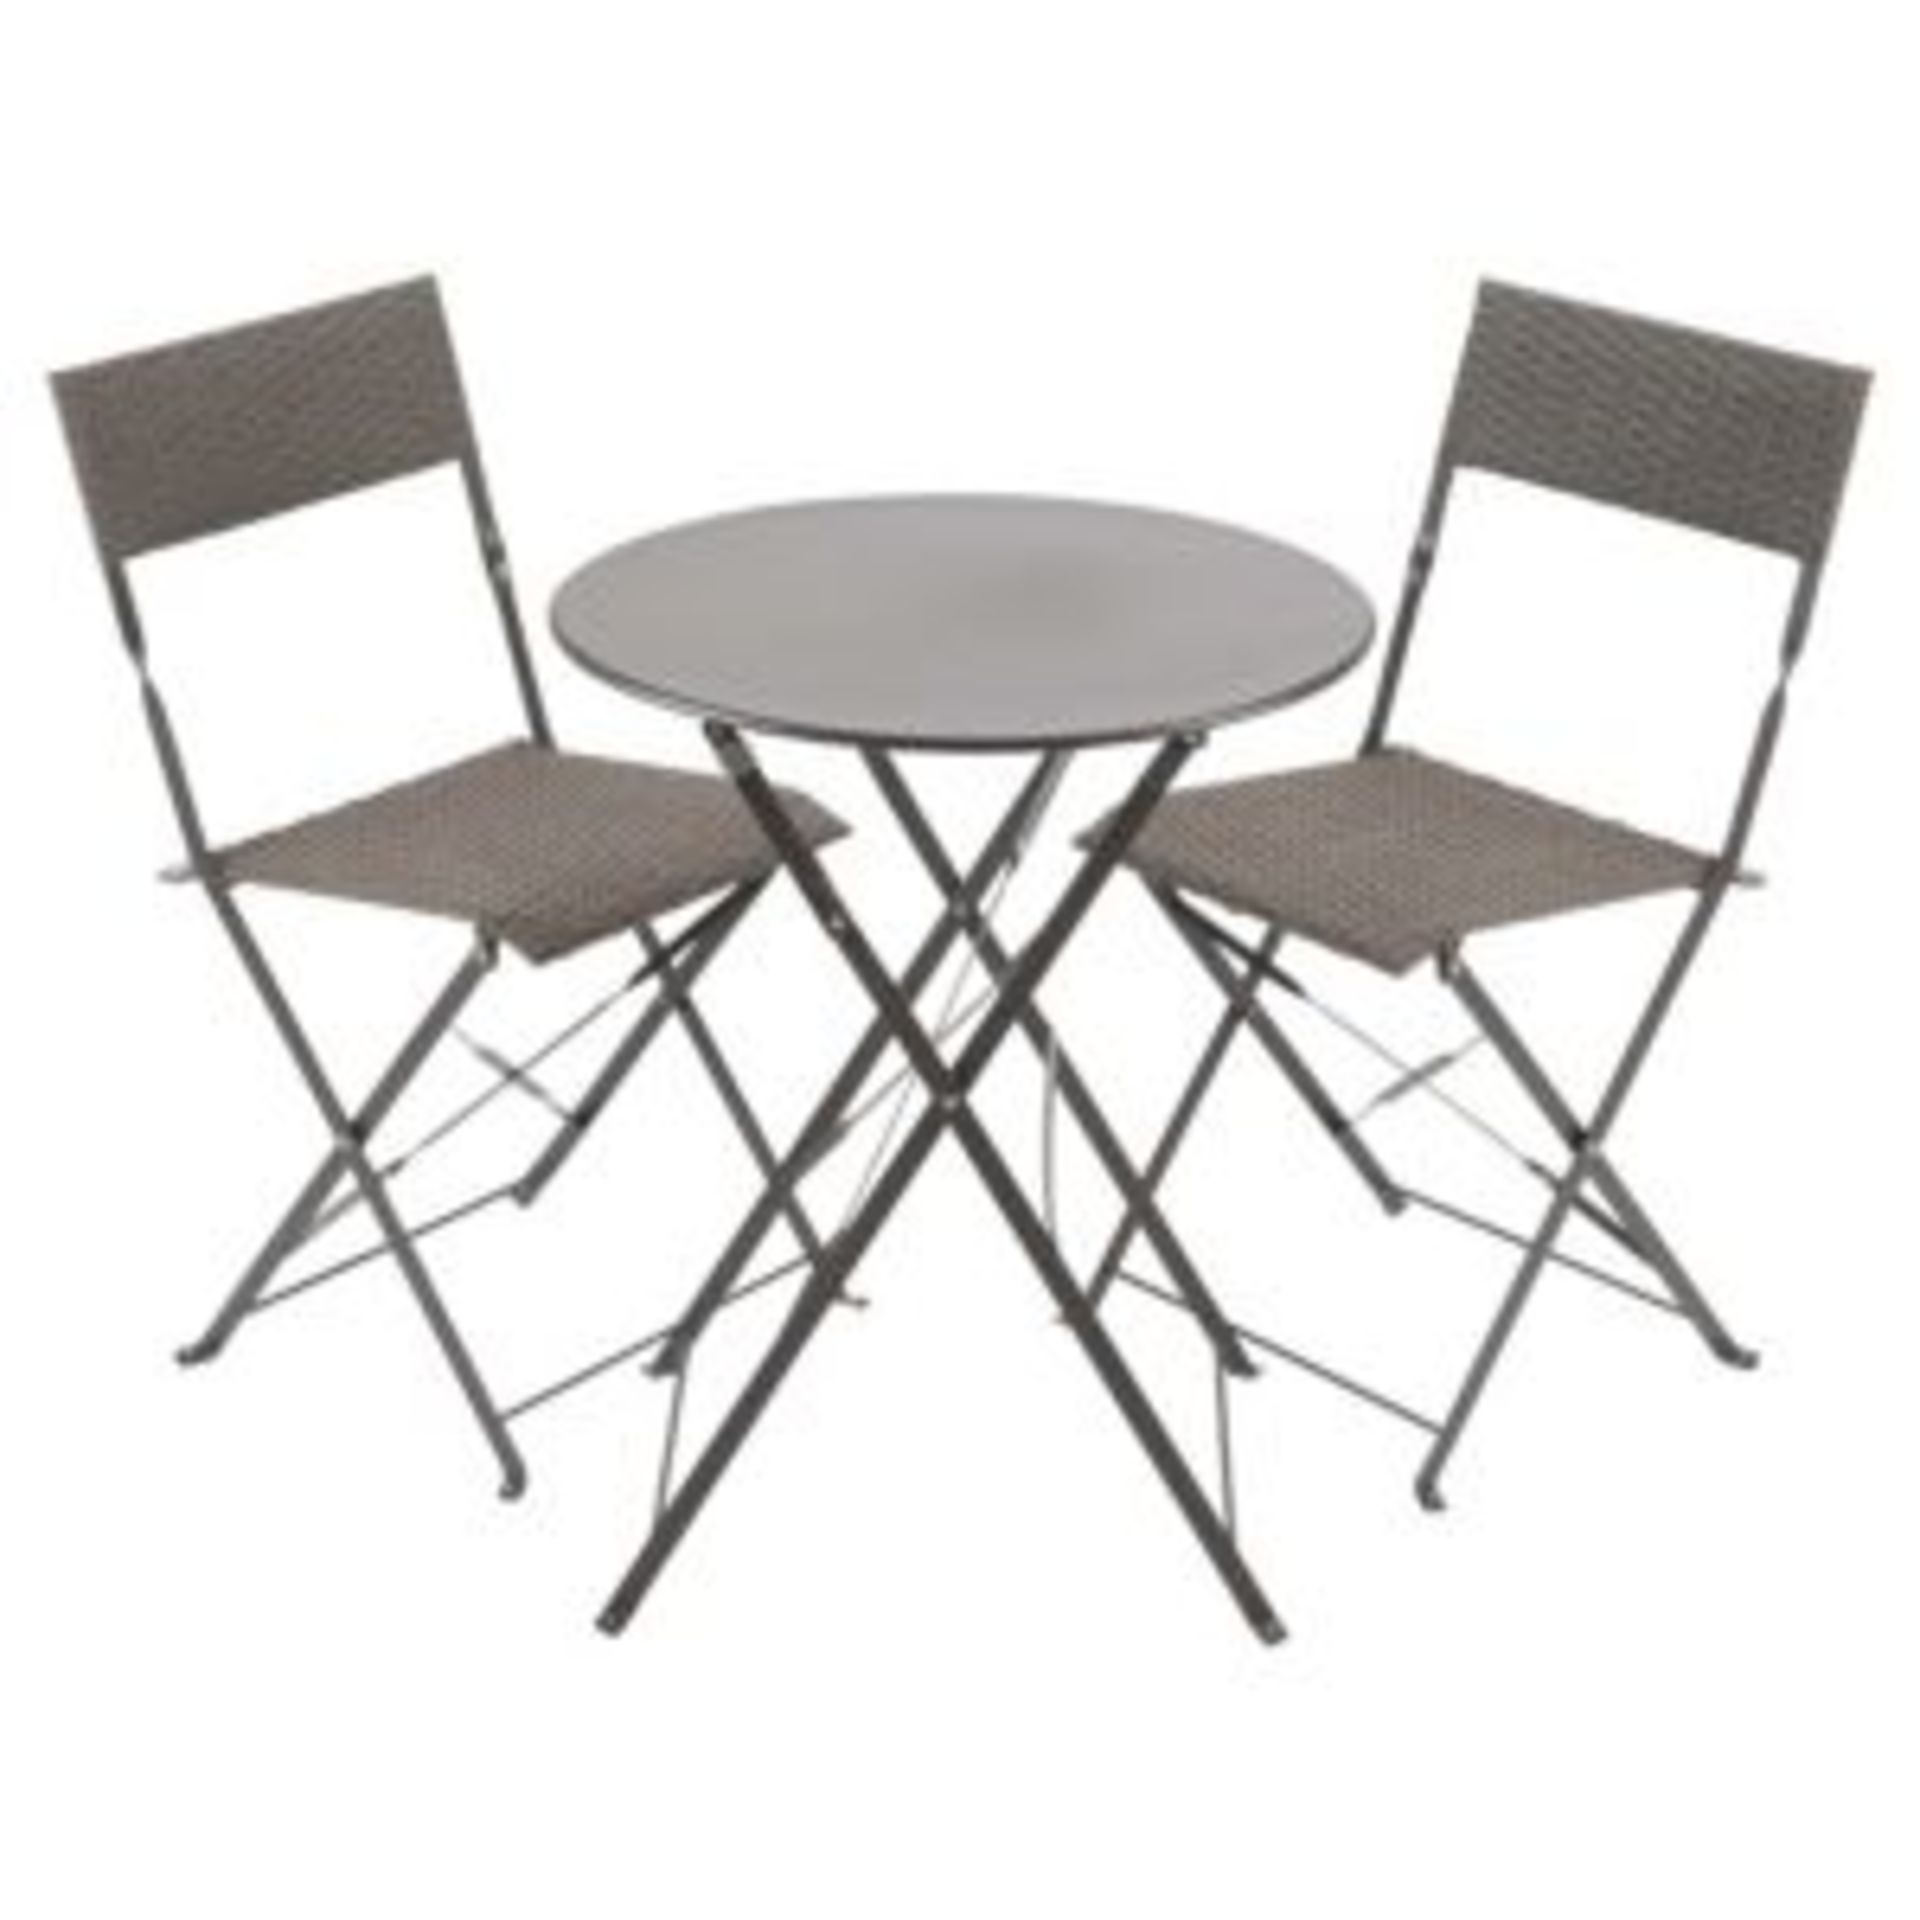 V Brand New Atlas Rattan Folding Bistro Set - Metal Table - Two Chairs - ISP £91.99 - Image 2 of 4